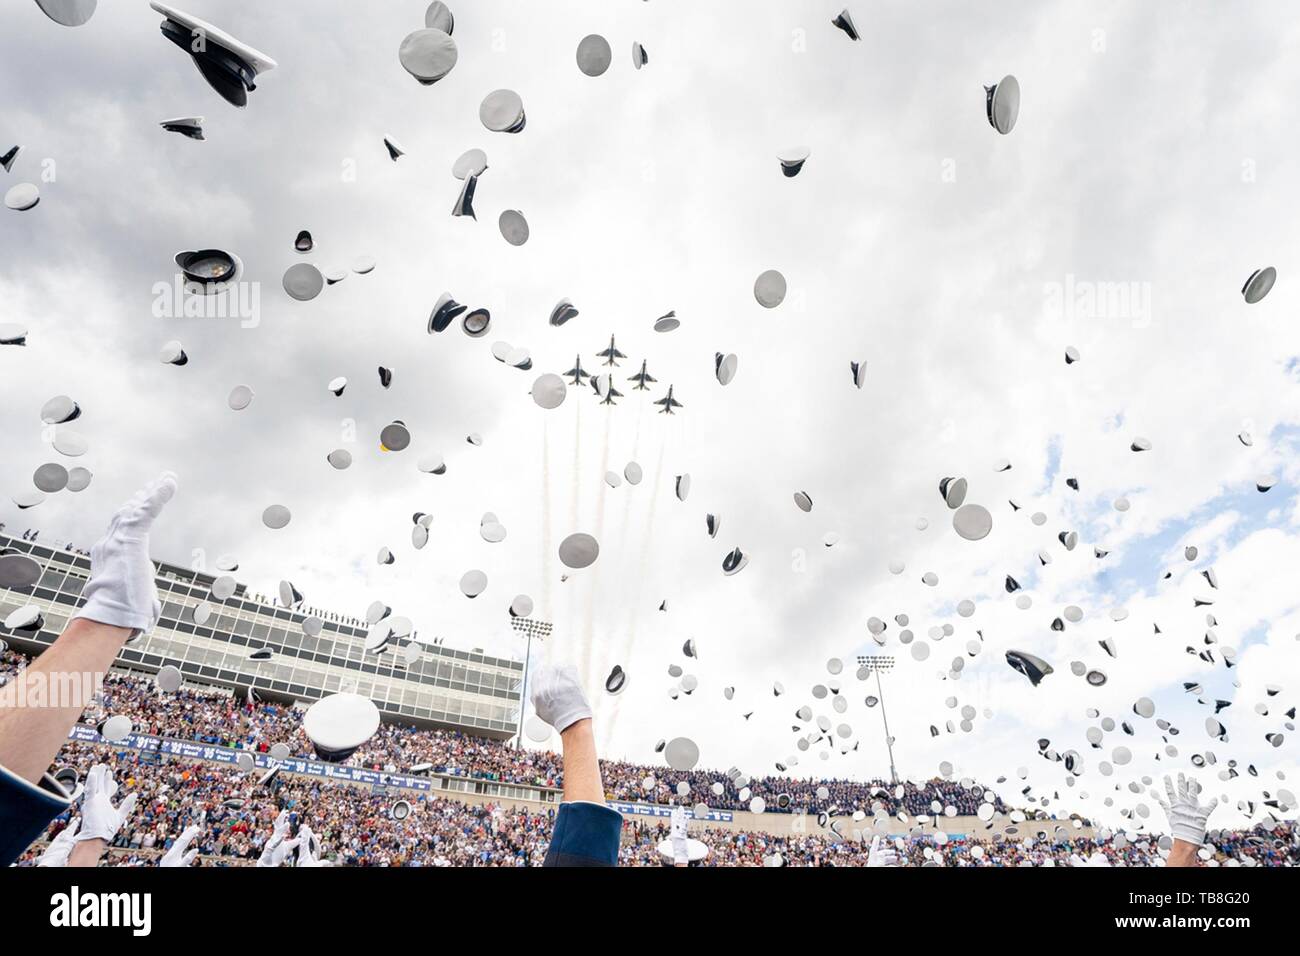 U.S. Air Force Academy cadets celebrate by tossing their hats into the air at the conclusion of graduation ceremonies at the USAF Academy Falcon Stadium May 30, 2019 in Colorado Springs, Colorado. U.S. President Donald Trump gave the commencement address to the more than 900 graduates. Credit: Planetpix/Alamy Live News Stock Photo